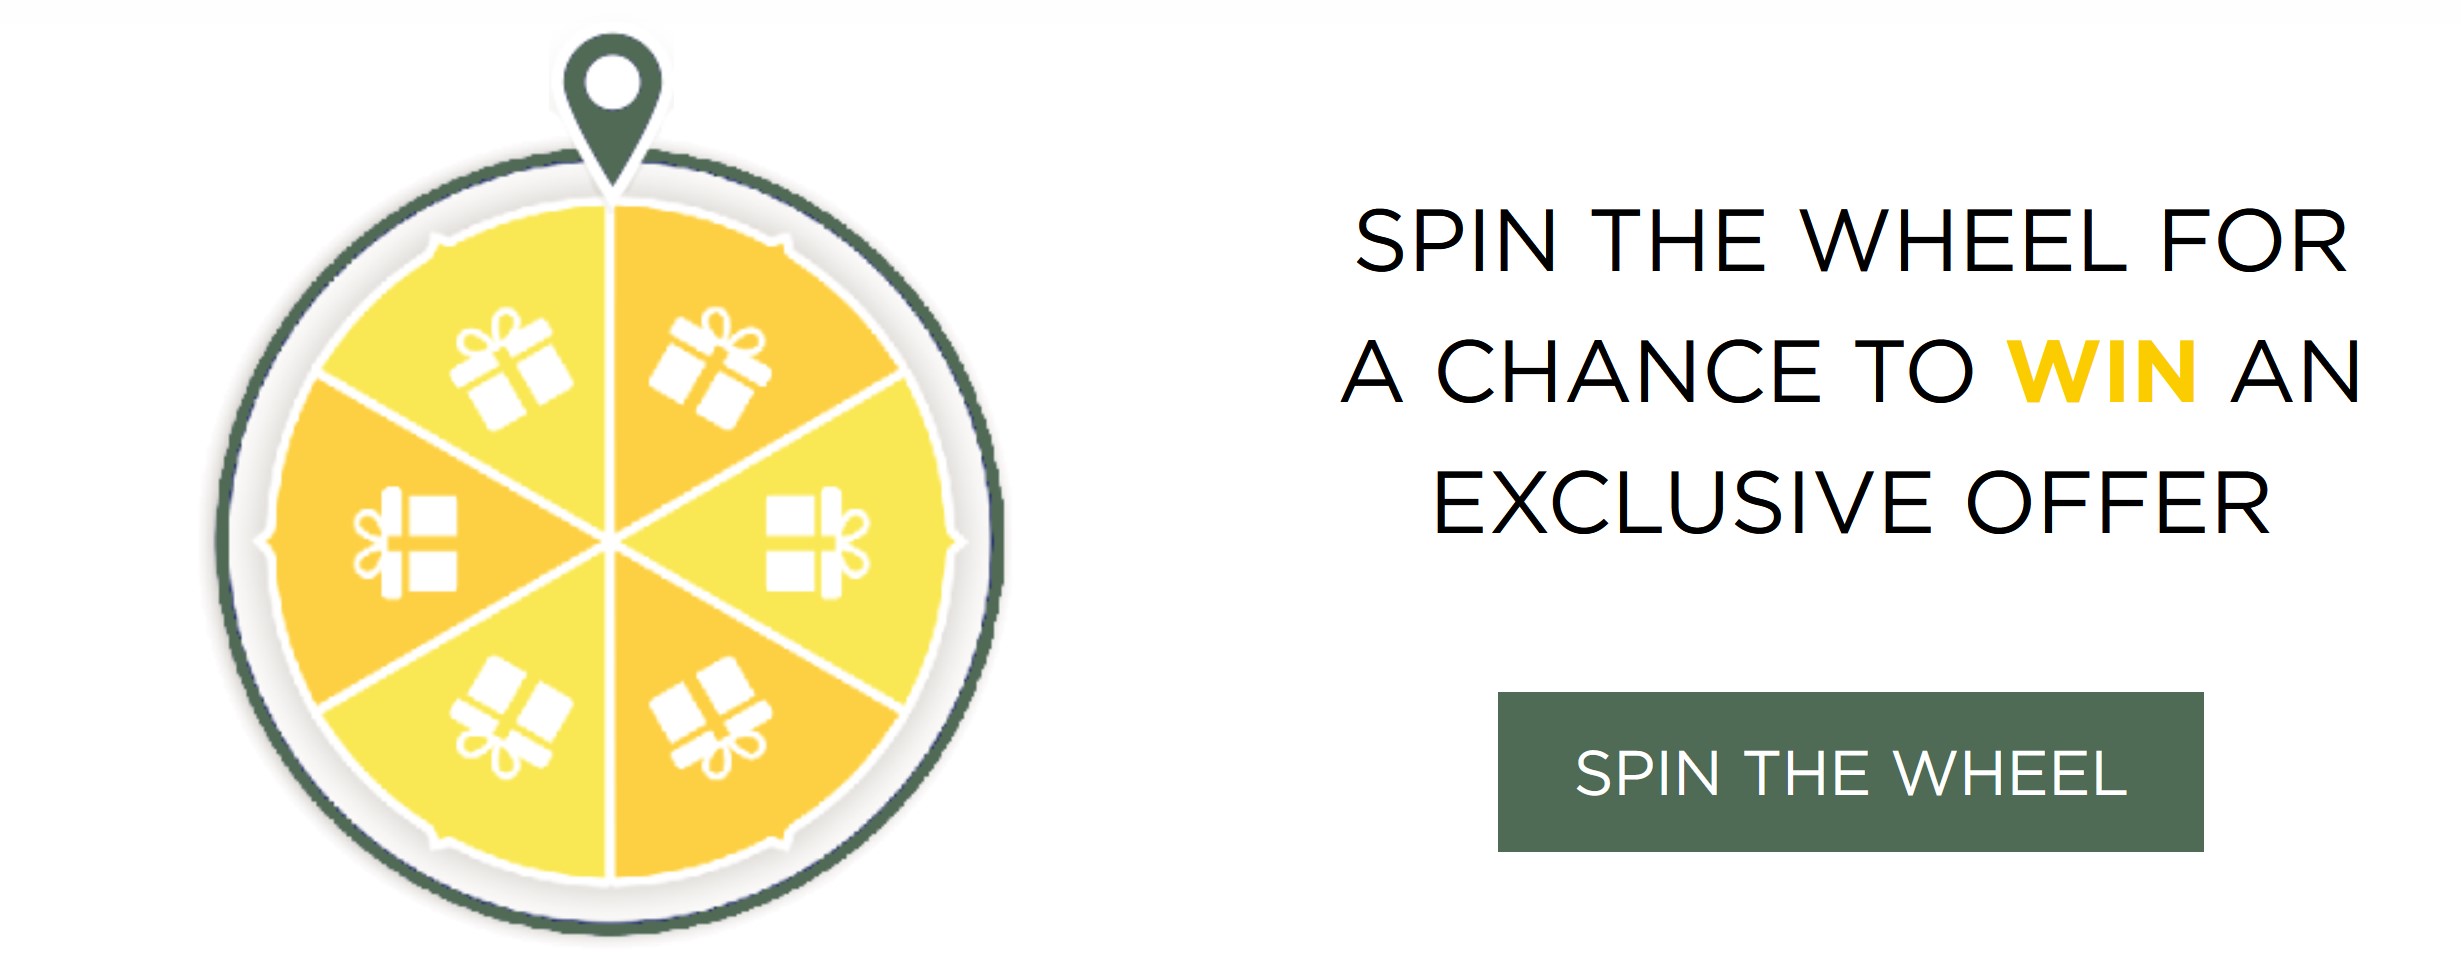 Spin the wheel for a chance to win an exclusive offer at L'Occitane